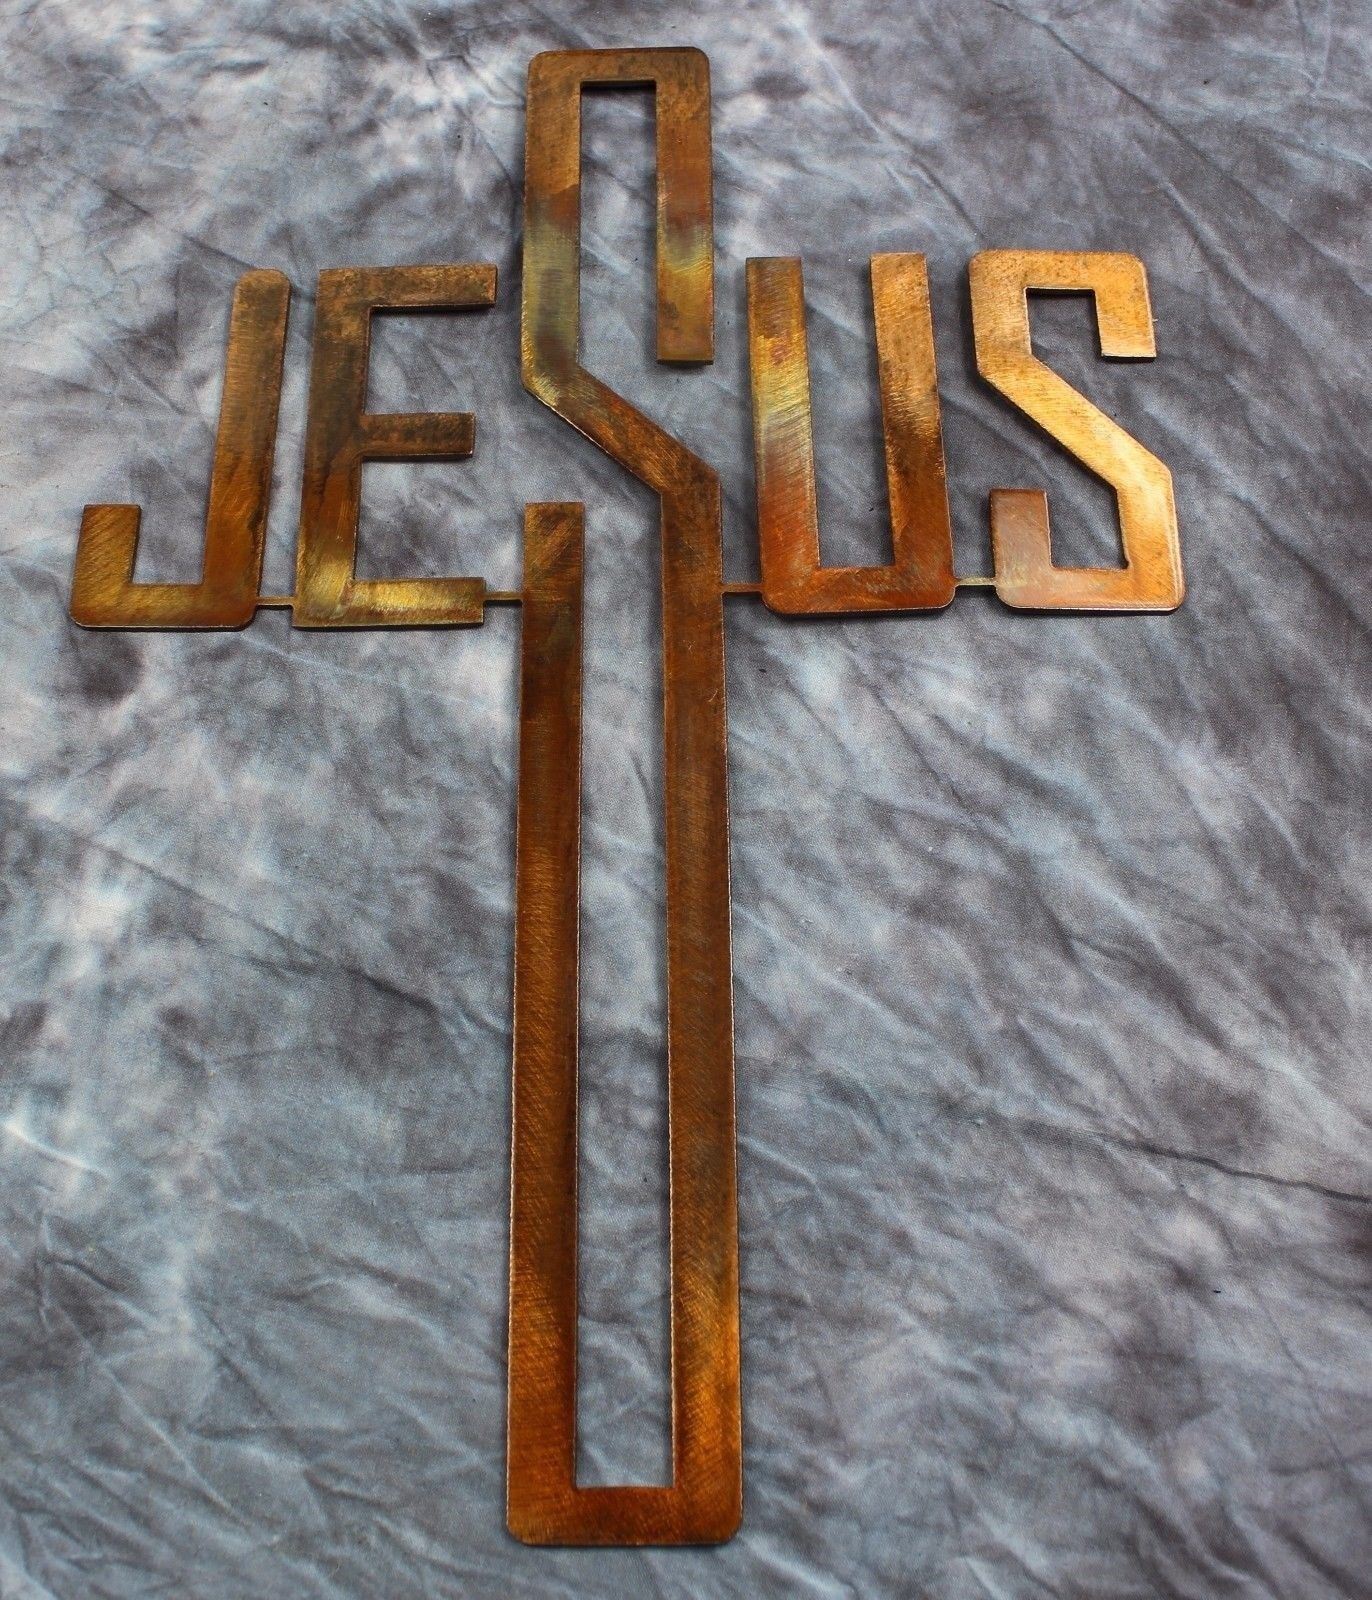 Primary image for Jesus Cross Metal Wall Art  13 3/4" tall x 10" wide